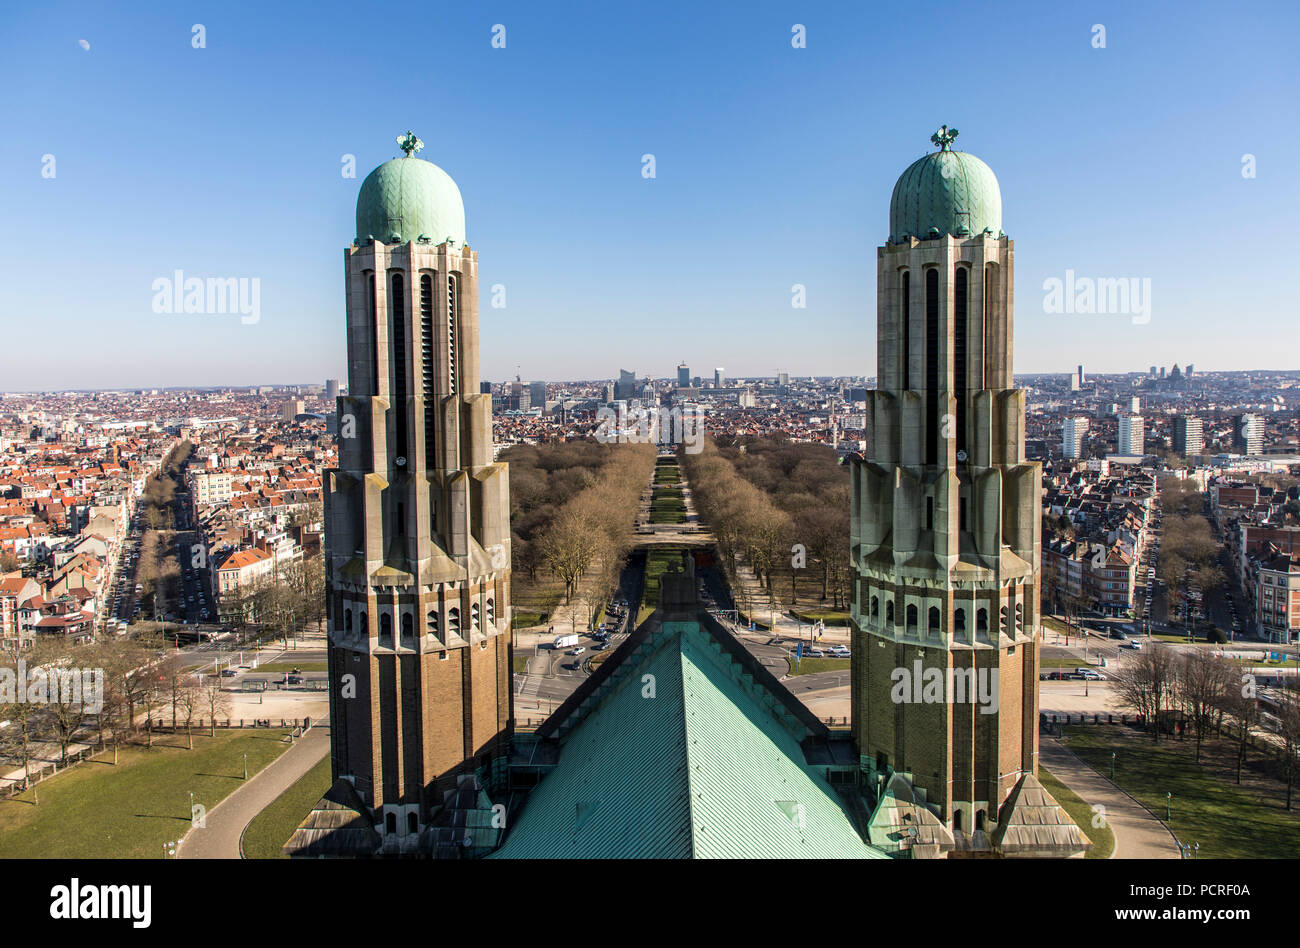 Church of the National Basilica of the Sacred Heart, Basilique Nationale du SacrŽ-CÏur, Basilica of Koekelberg, Brussels, view from the viewing platfo Stock Photo